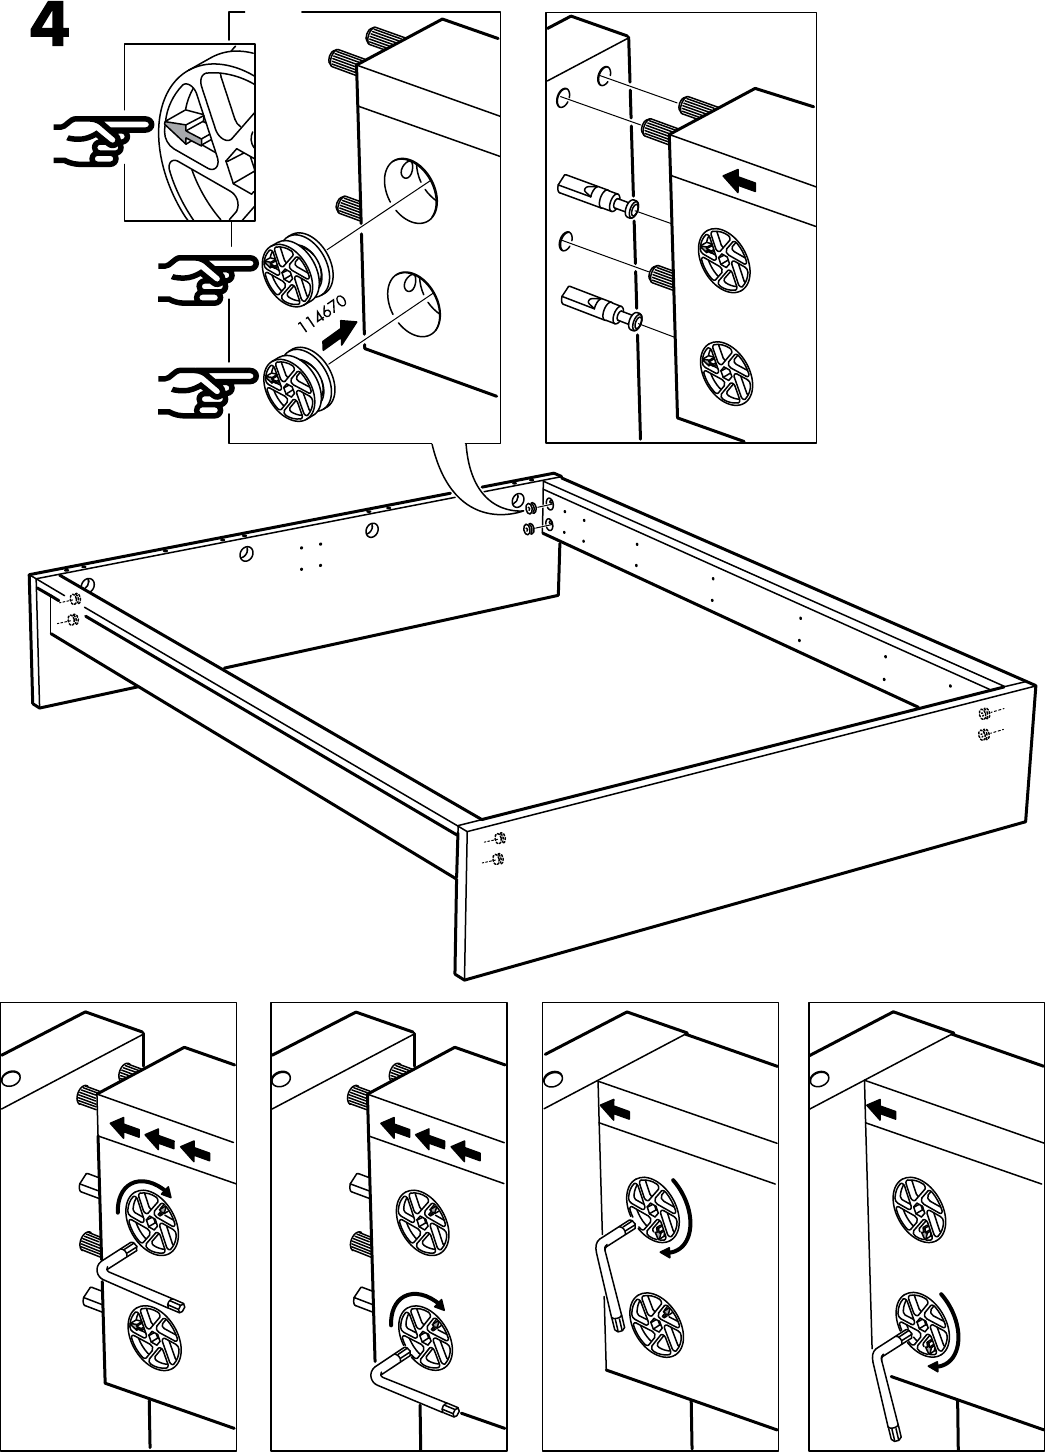 manual ikea 402 494 71 malm bed page 7 of 16 all languages